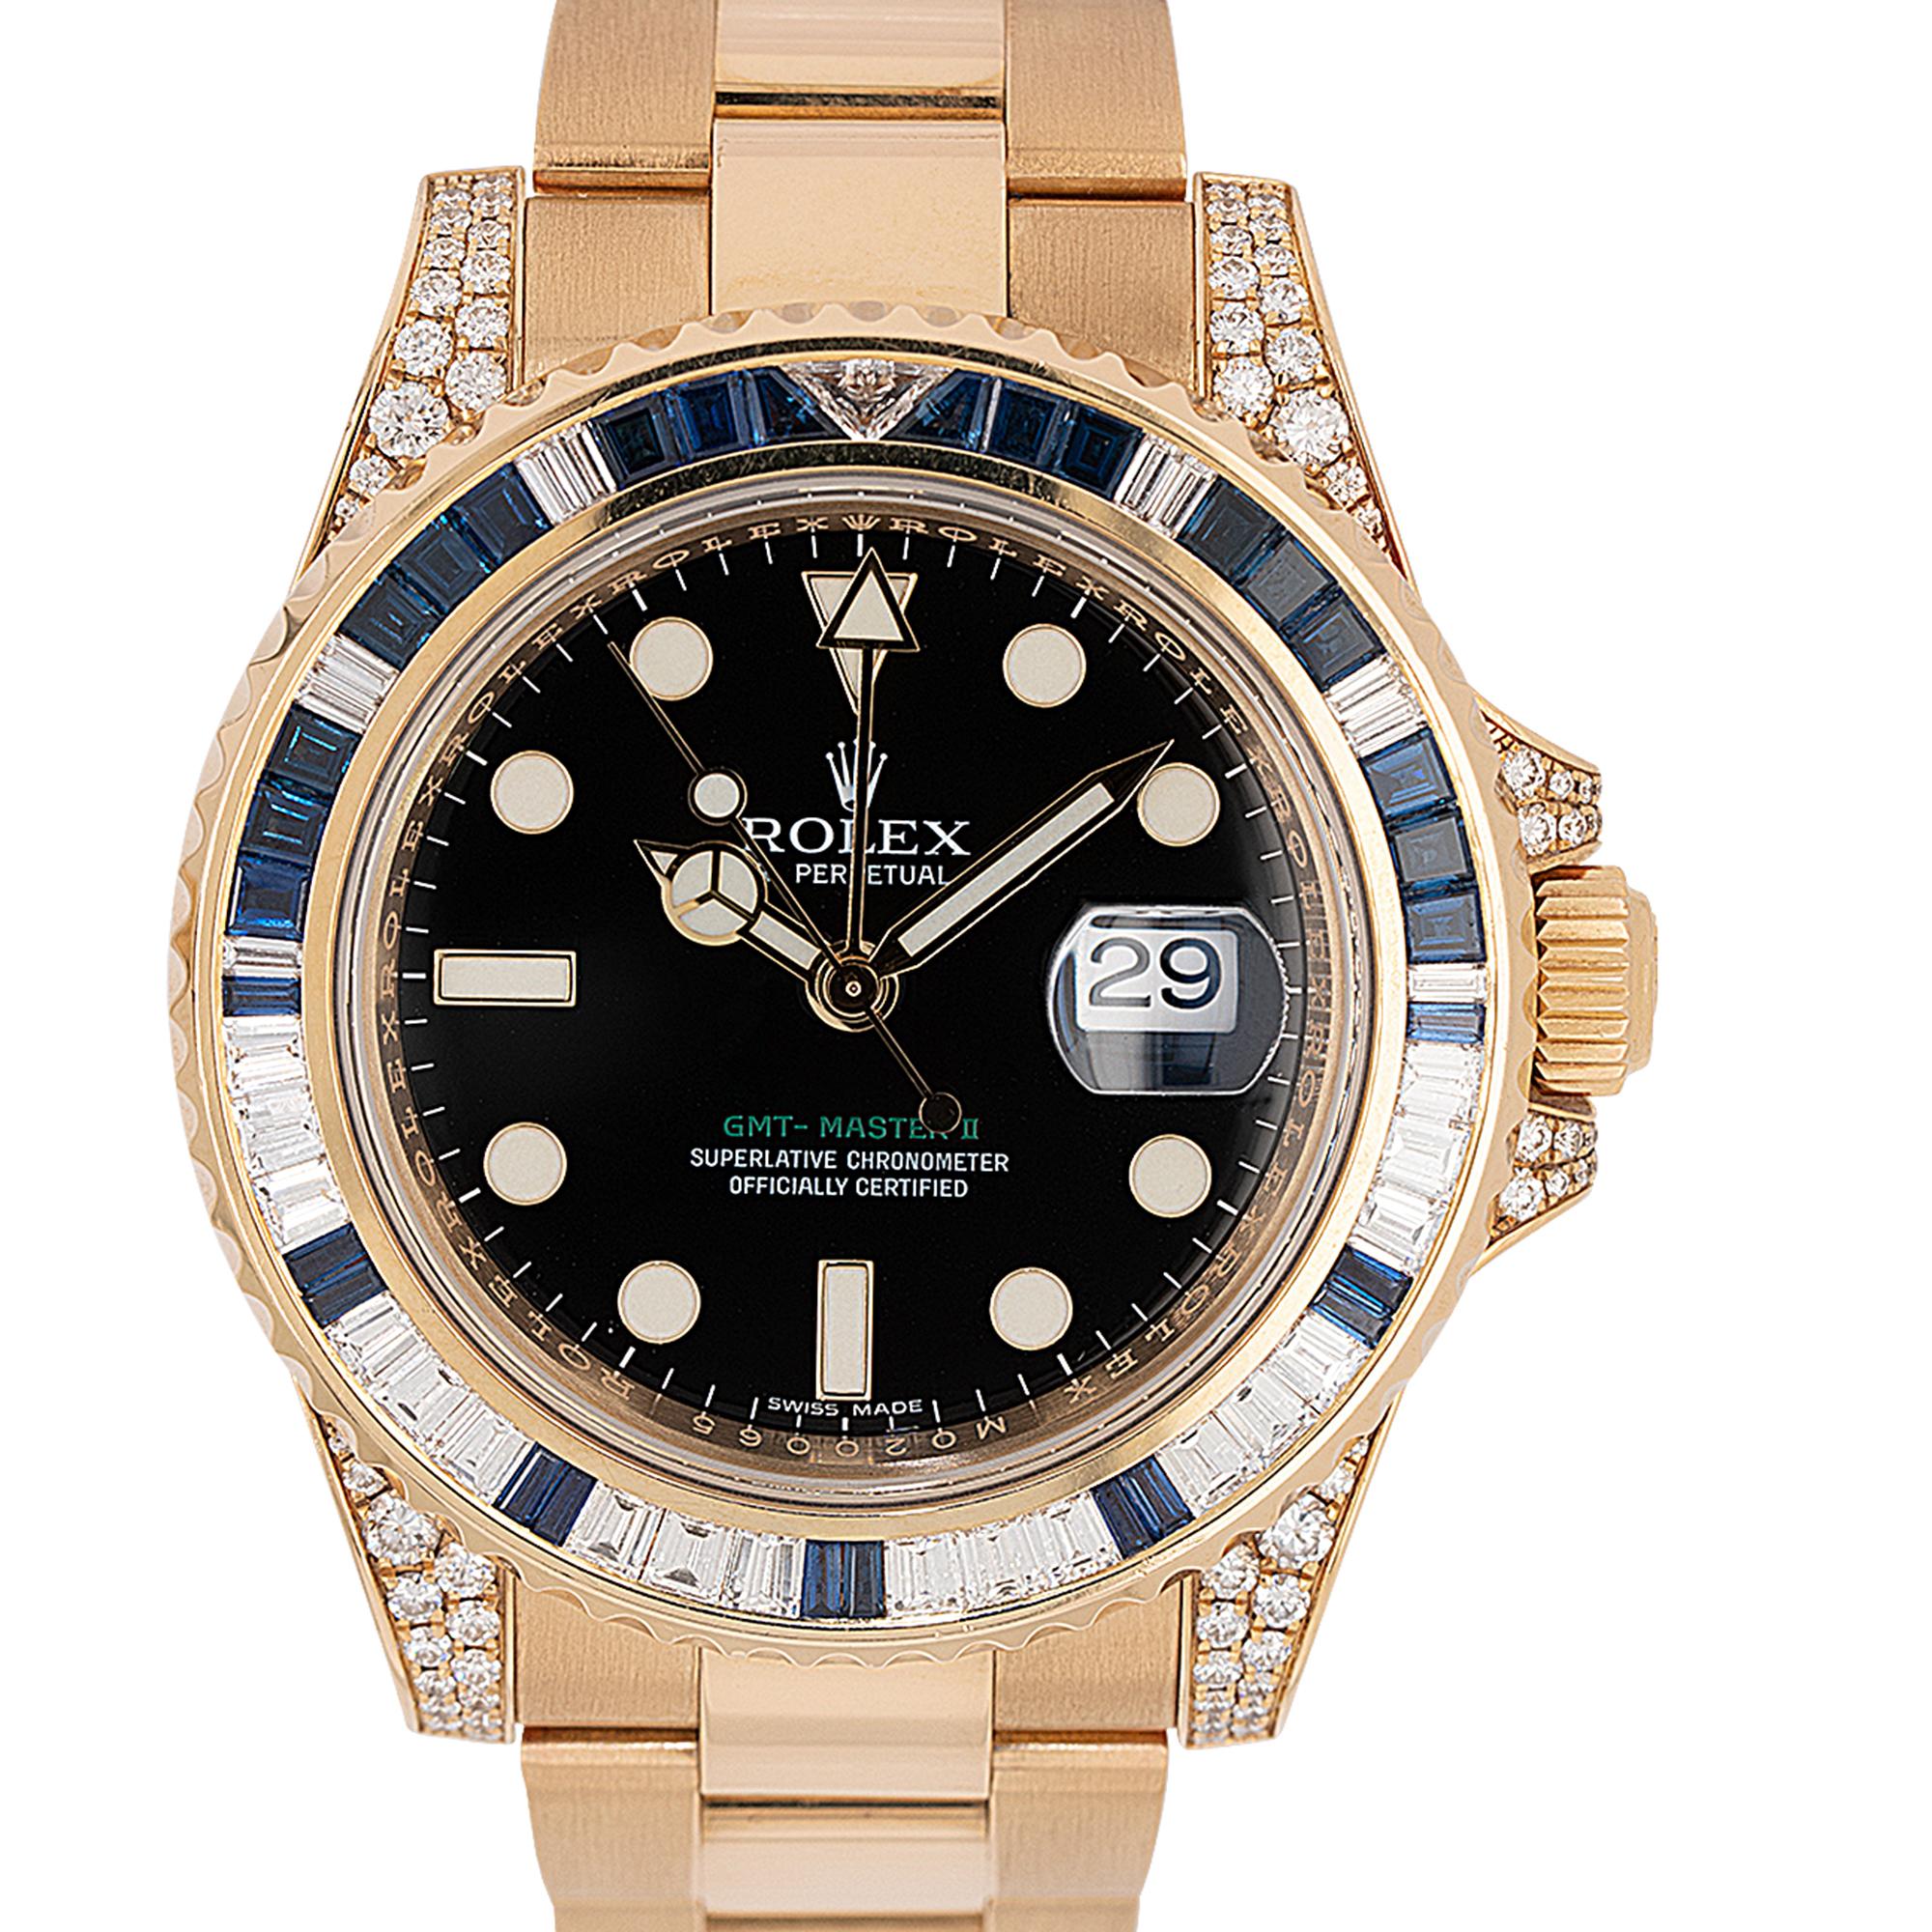 Experience luxury and elegance with the Rolex 116758SA GMT-Master II. Crafted in 18k yellow gold, this exceptional timepiece showcases a captivating fusion of timeless design and exquisite craftsmanship. The scratch-resistant sapphire crystal,